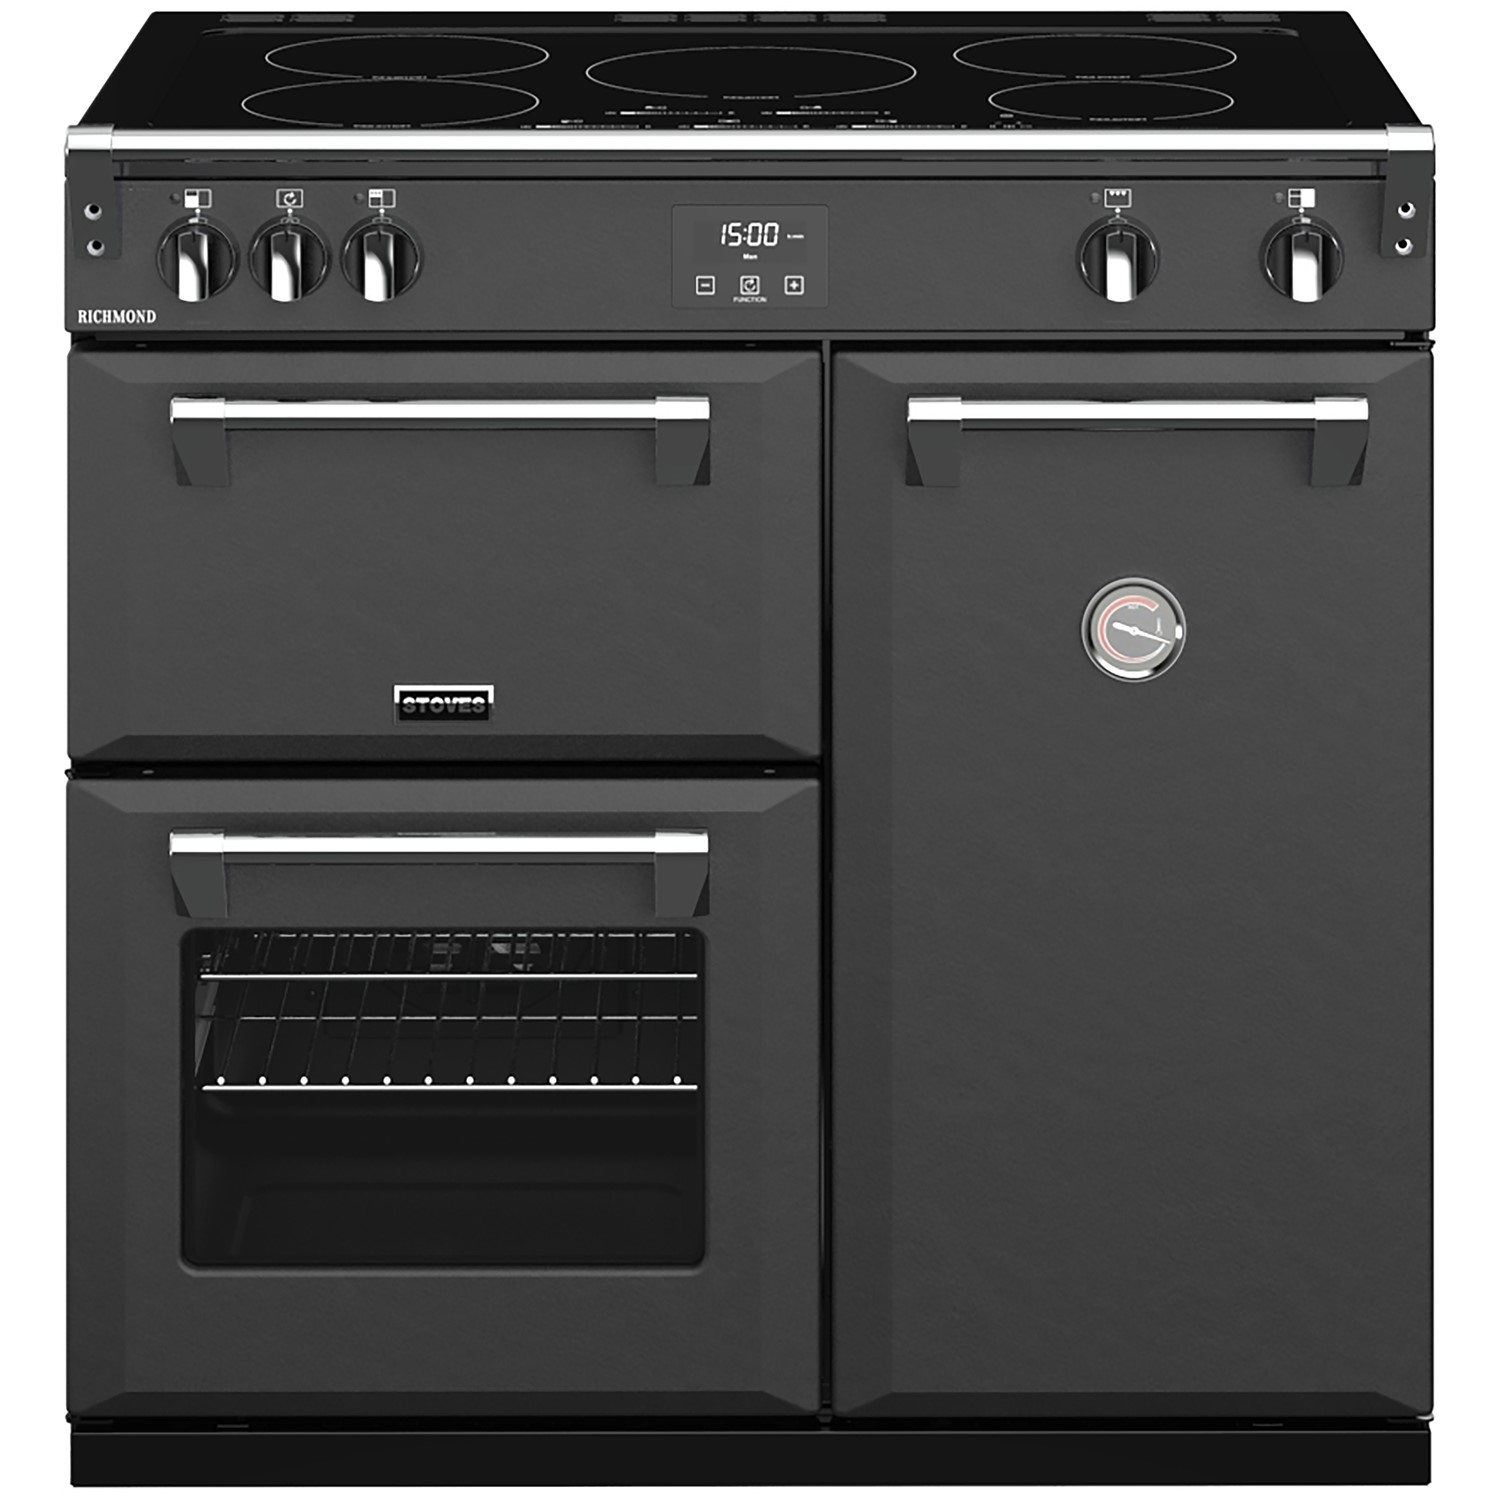 Stoves Richmond S900Ei 90cm Electric Range Cooker with Induction Hob - Anthracite - A/A/A Rated